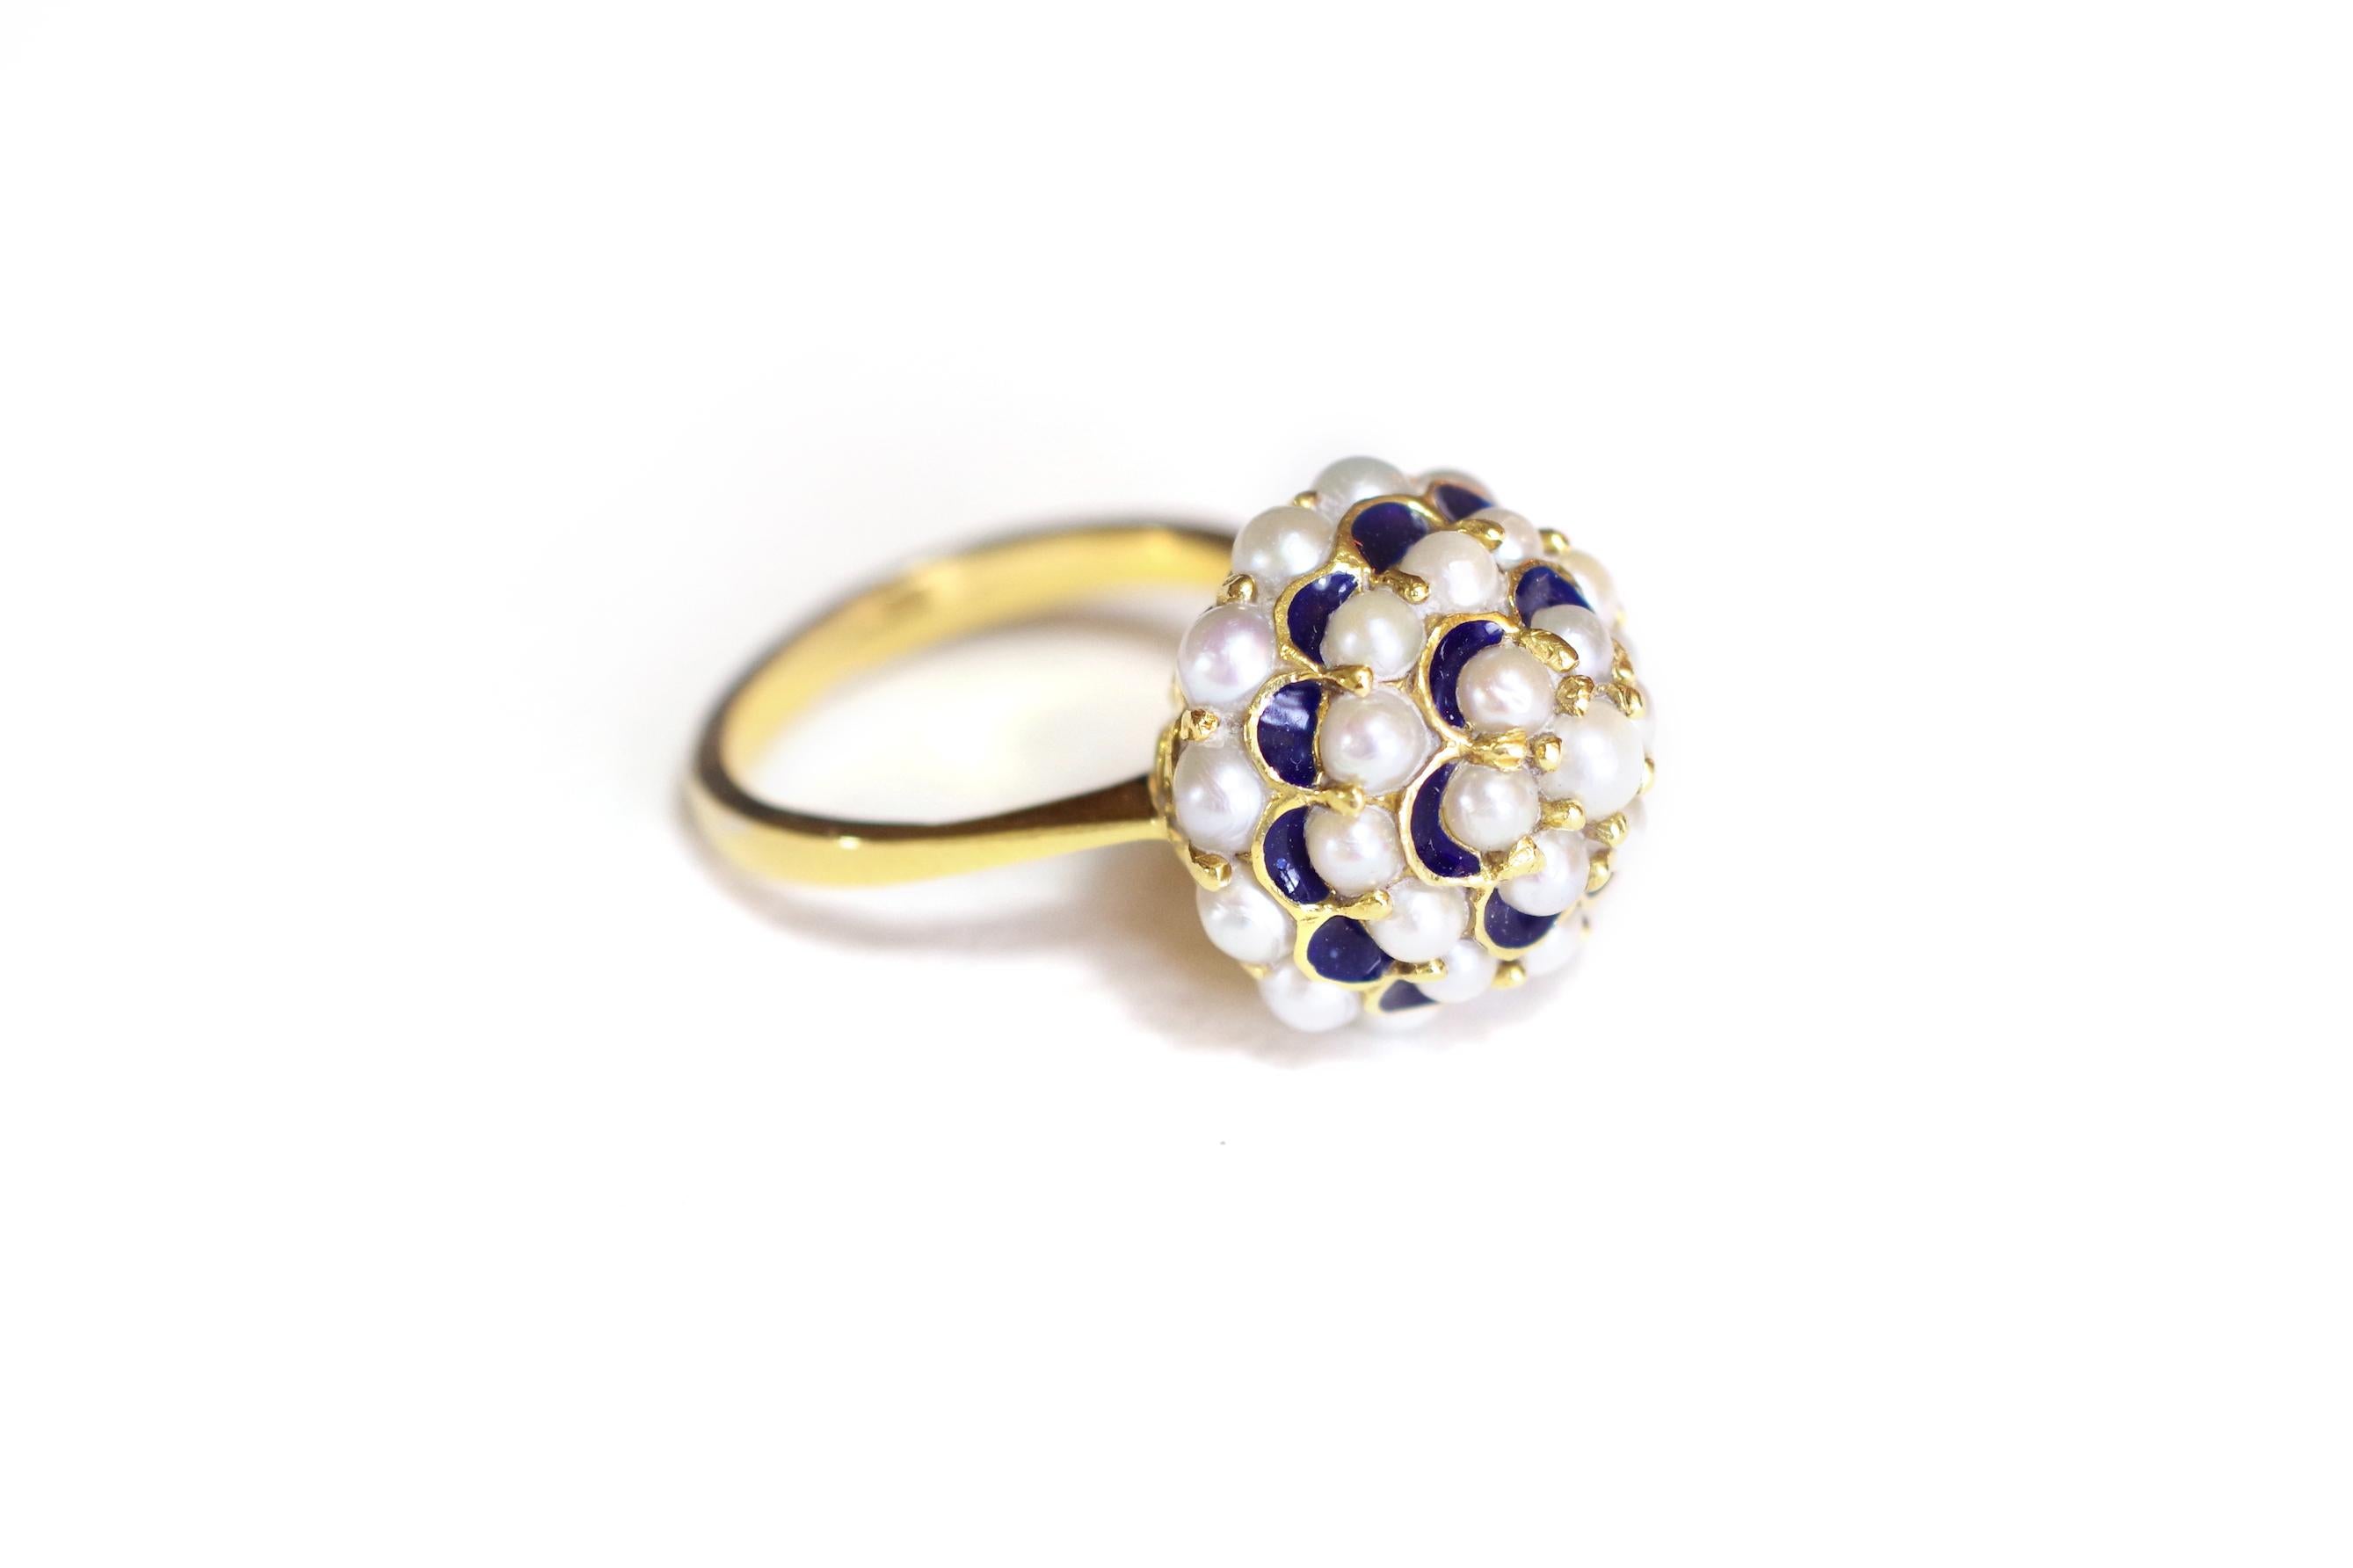 Uncut Retro Dome Pearl Ring Made of 18 Karat Yellow Gold For Sale